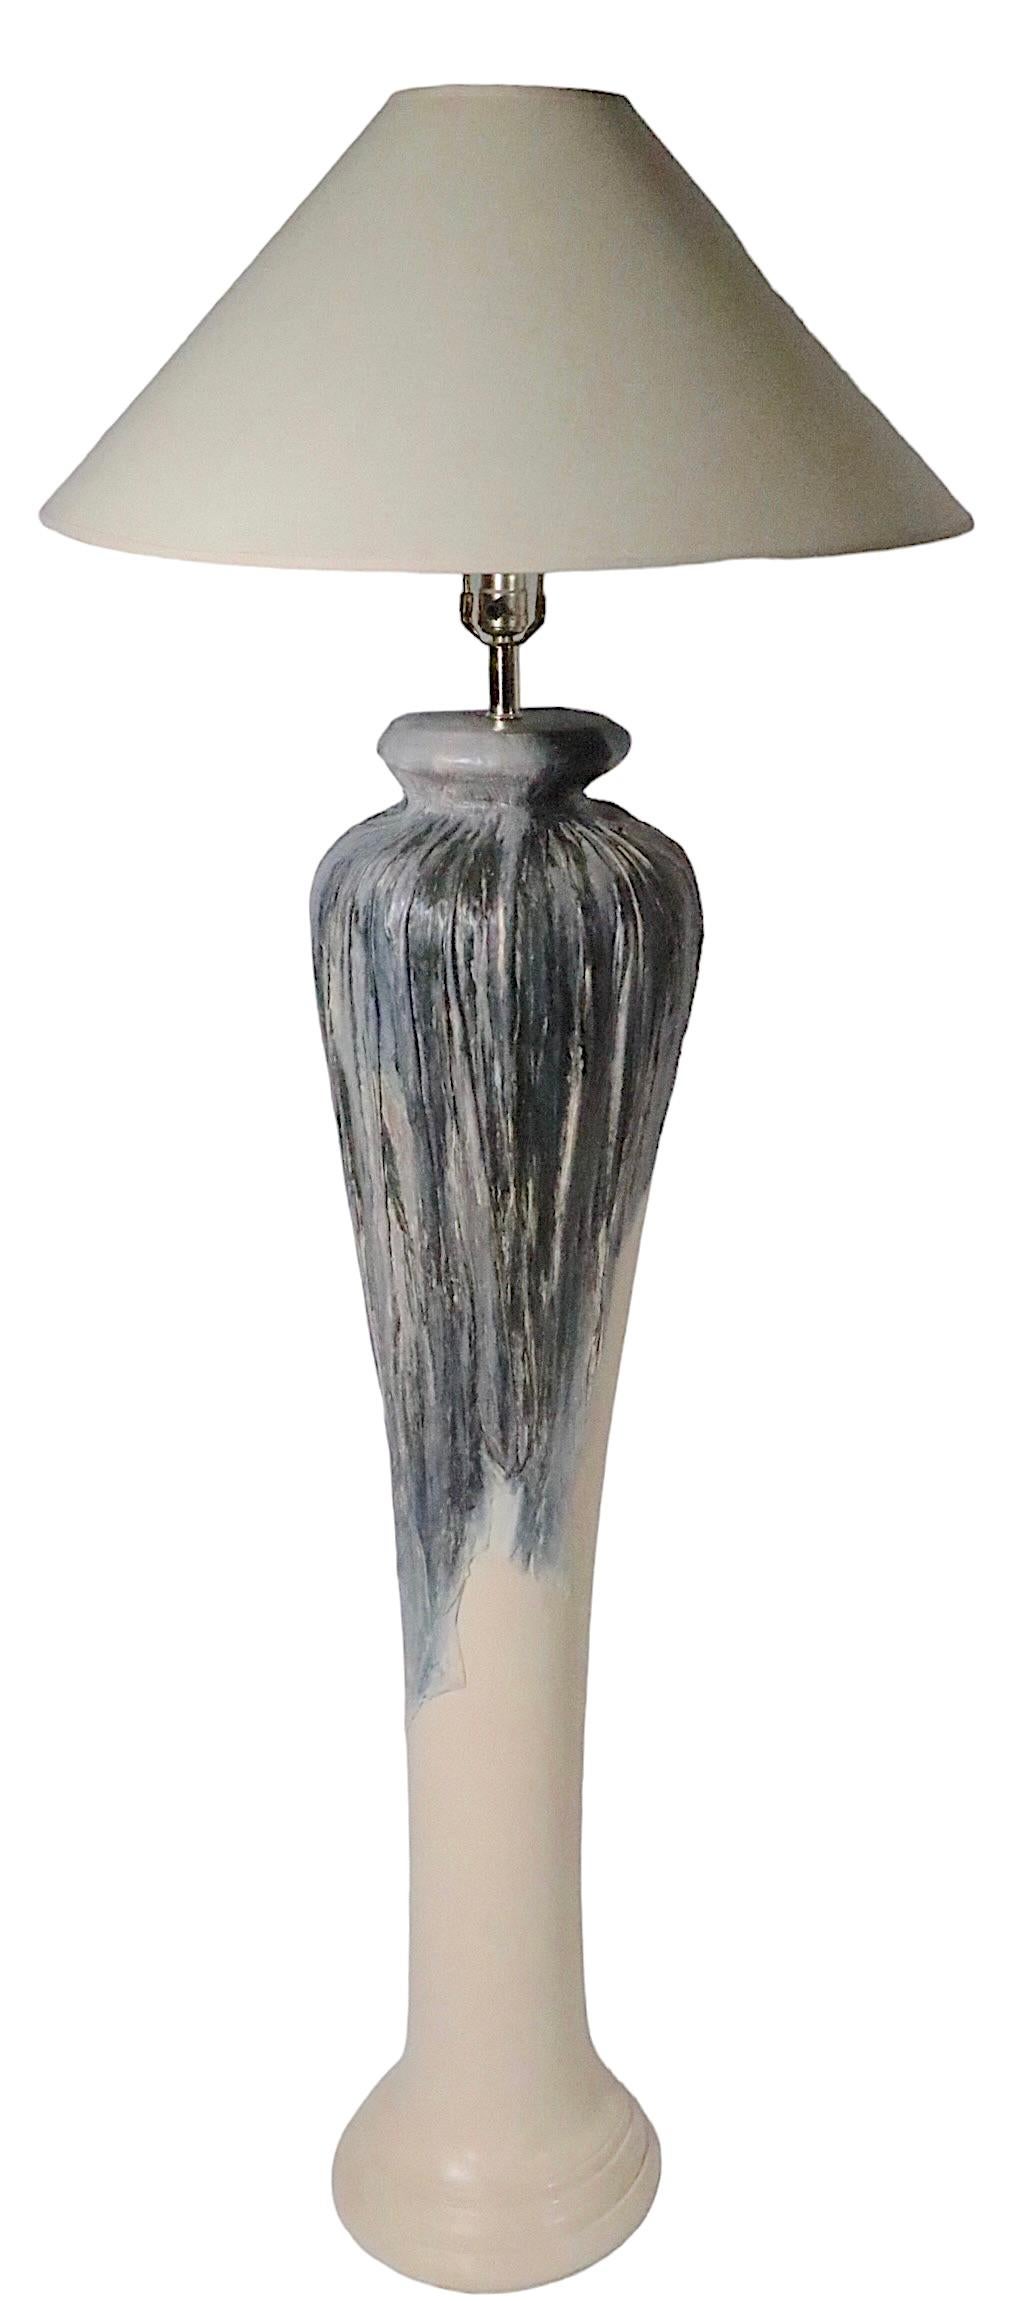 Dramatic oversize ceramic floor lamp of bulbous form with contrasting dark toned, textured glaze at the upper section, which appears to drip down onto the smooth creme colored bottom section. The lamp is in very good original, clean and working